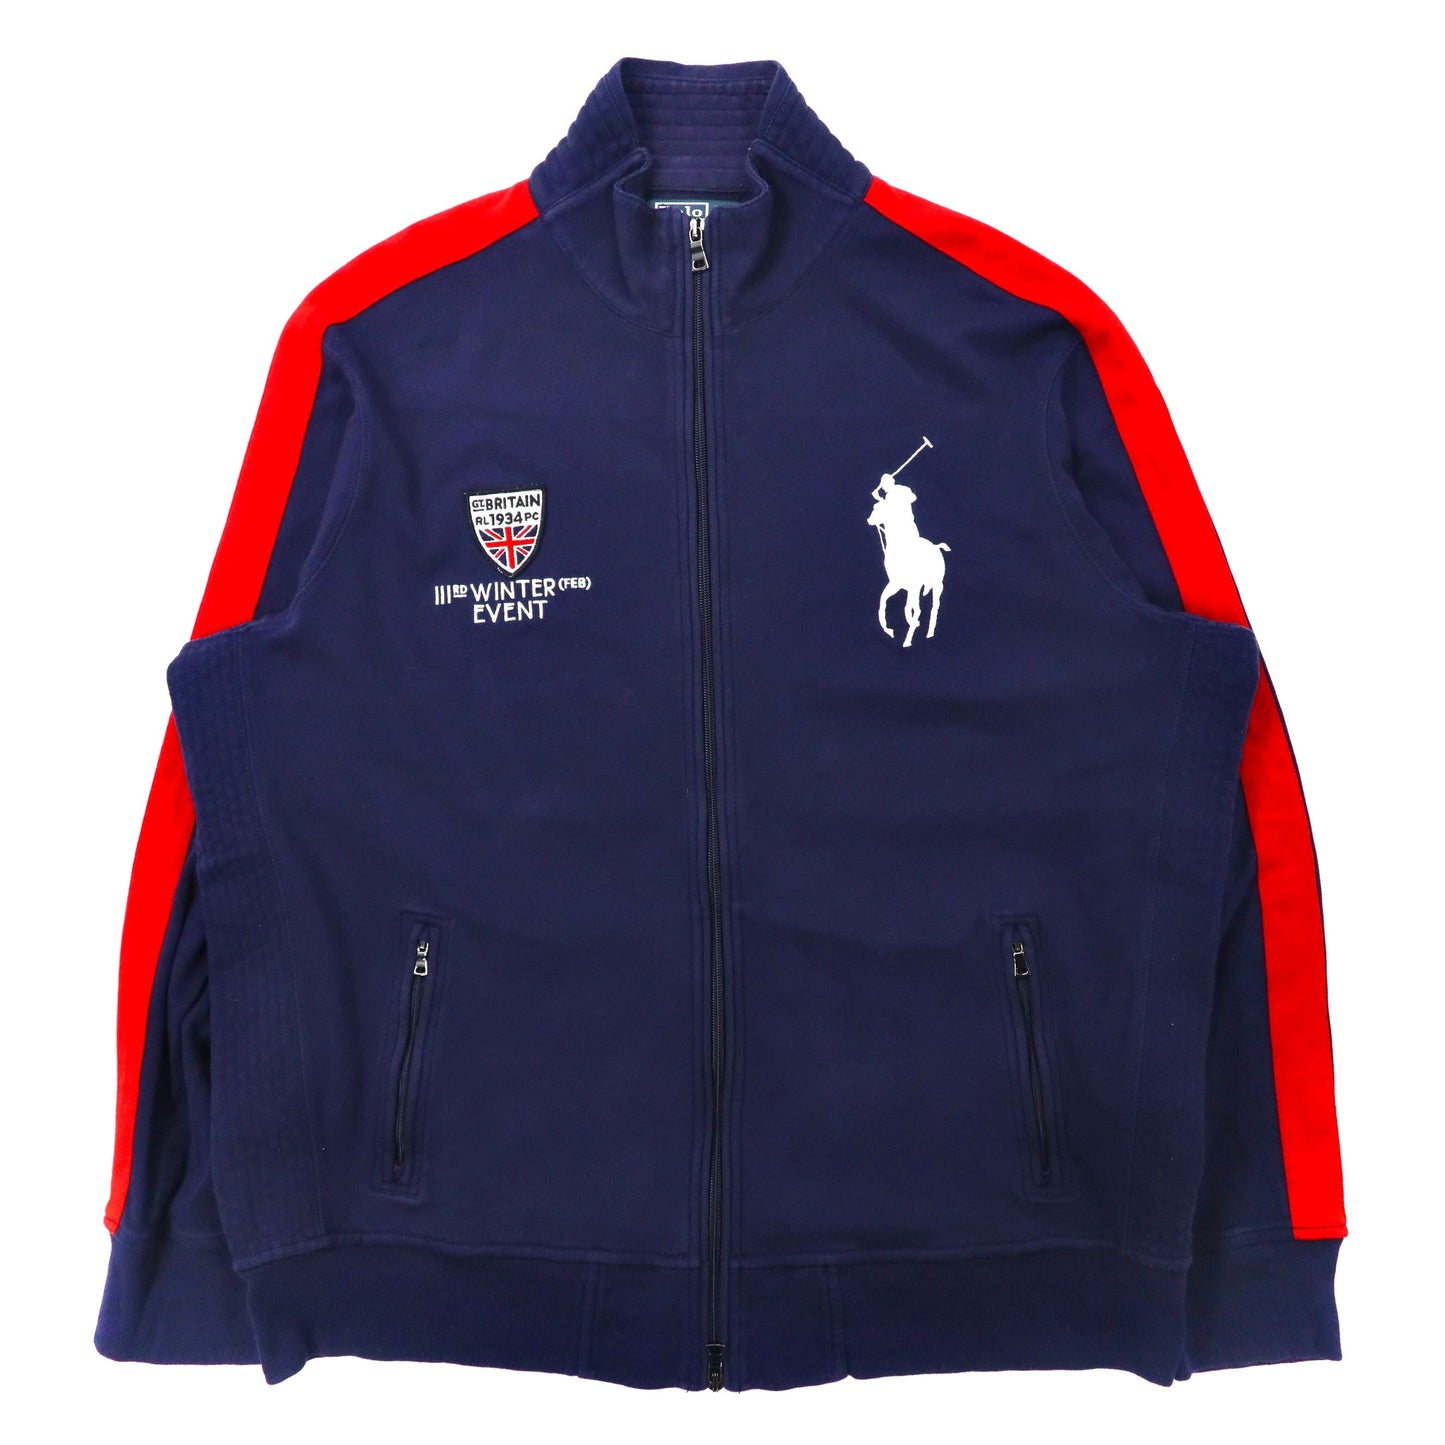 POLO by RALPH LAUREN TRACK JACKET Jersey XL Navy Cotton Side